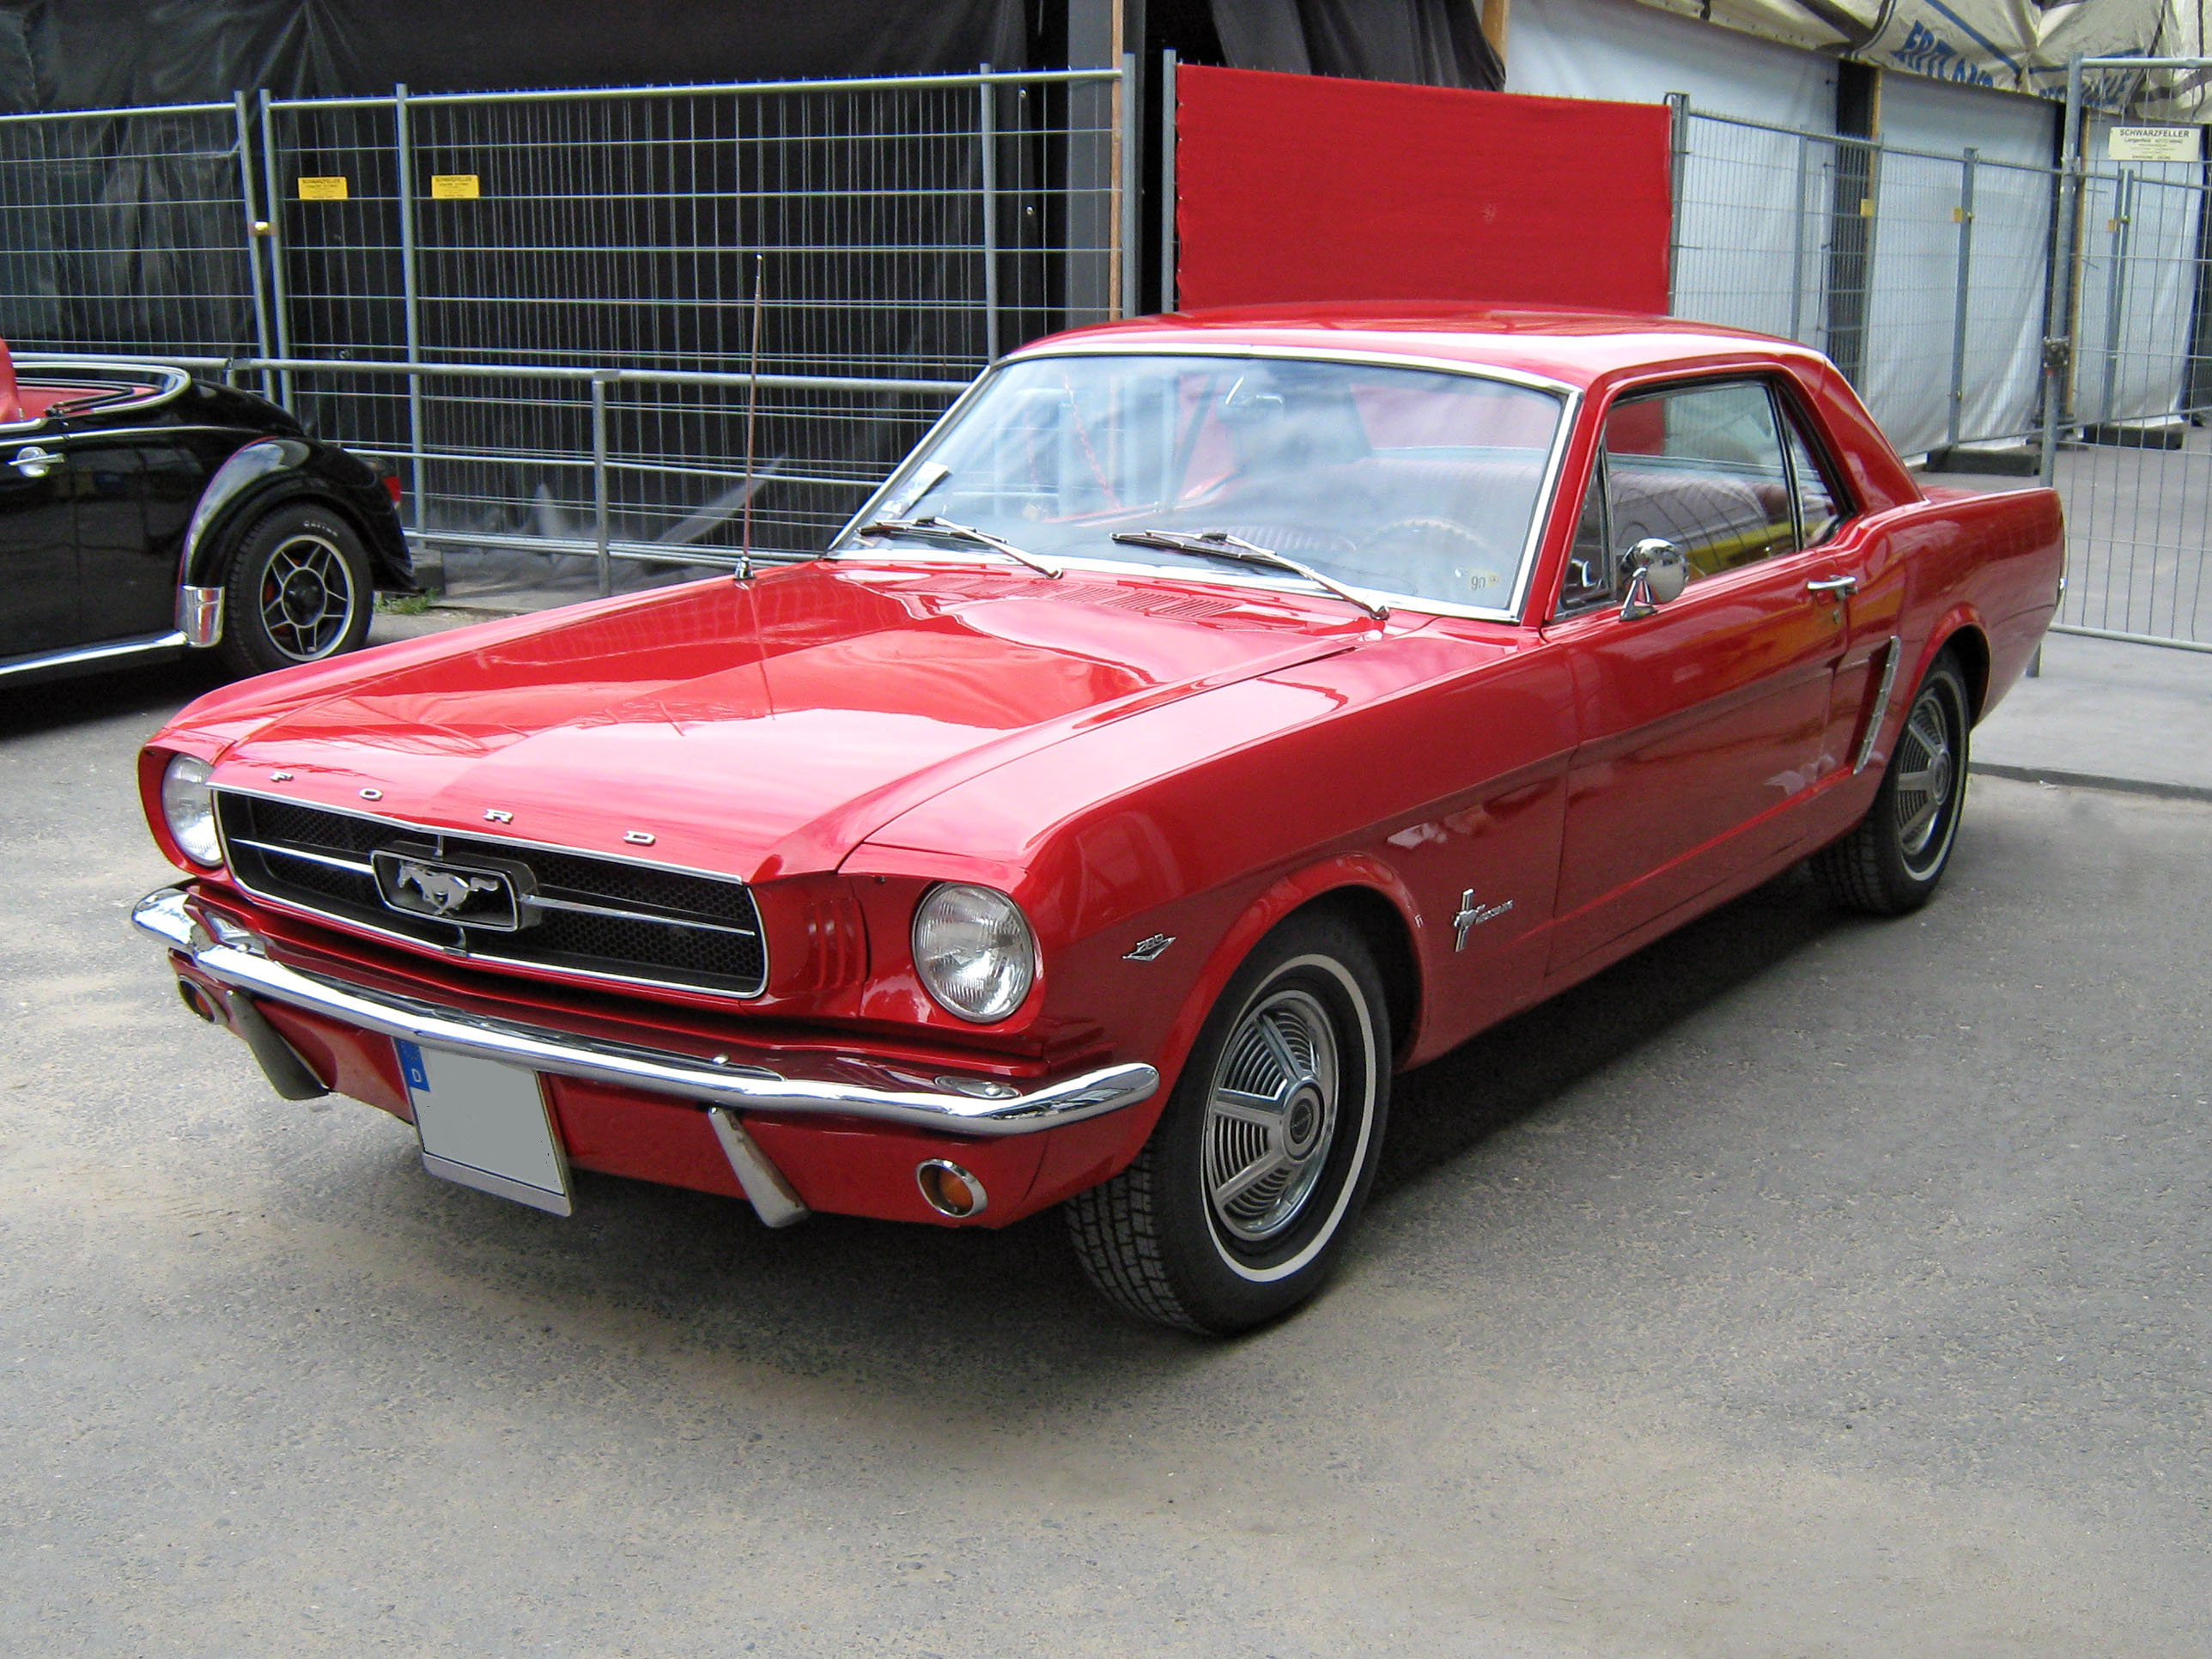 HQ 1965 Ford Mustang Wallpapers | File 860.25Kb